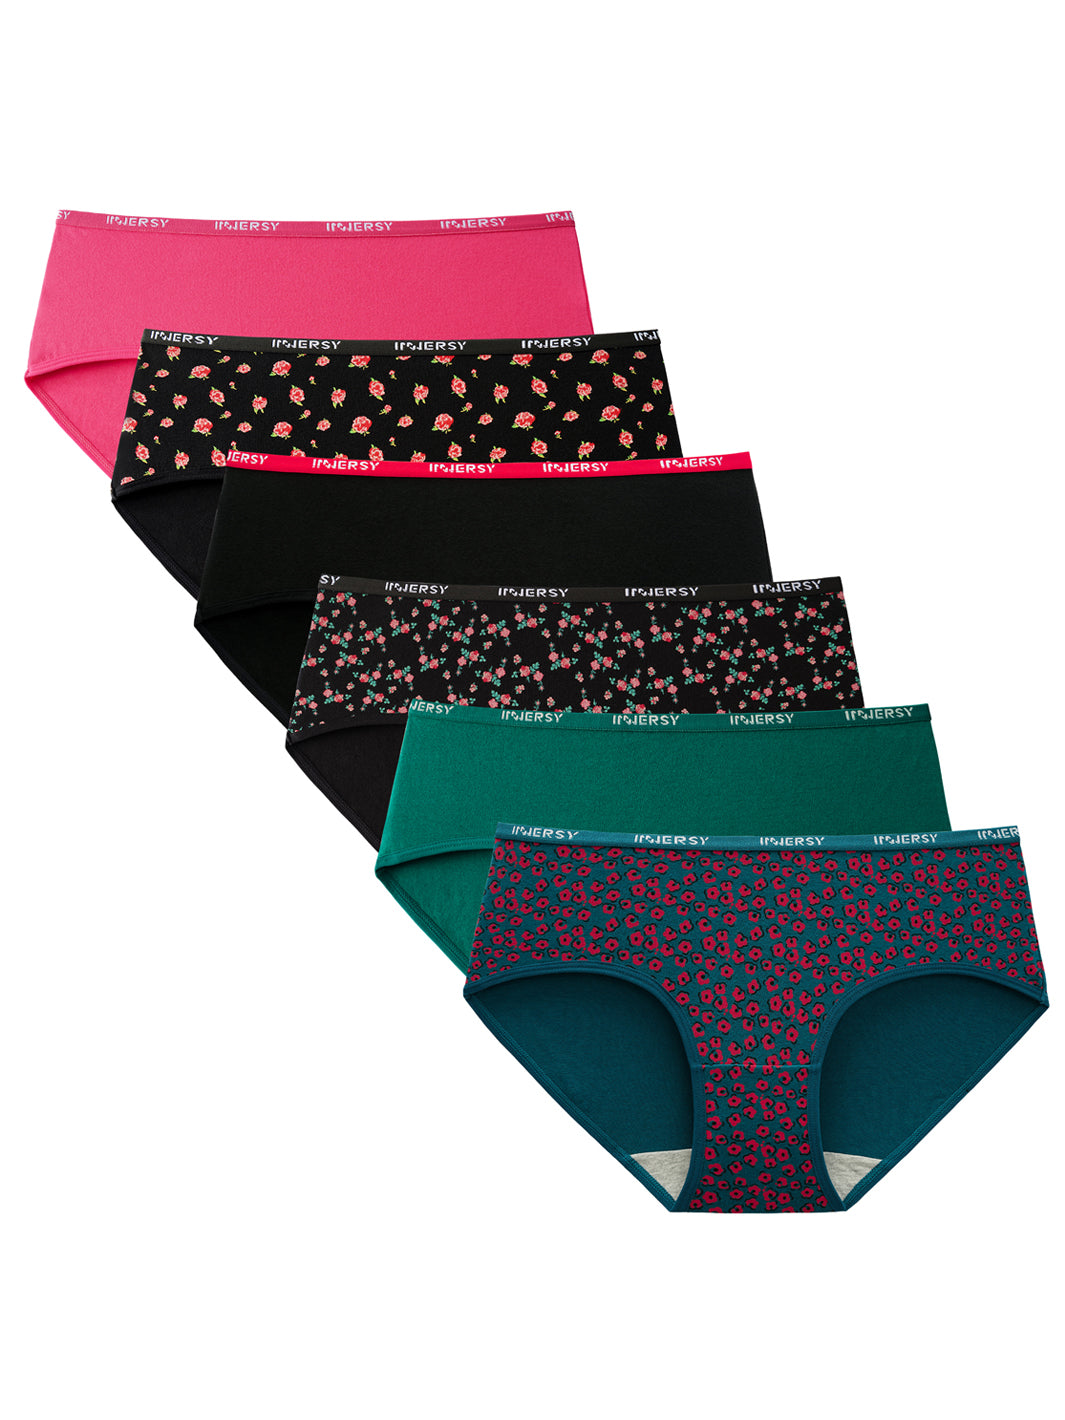 Innersy Ladies Underwear Comfy Cotton Knickers For Women Mid Rise